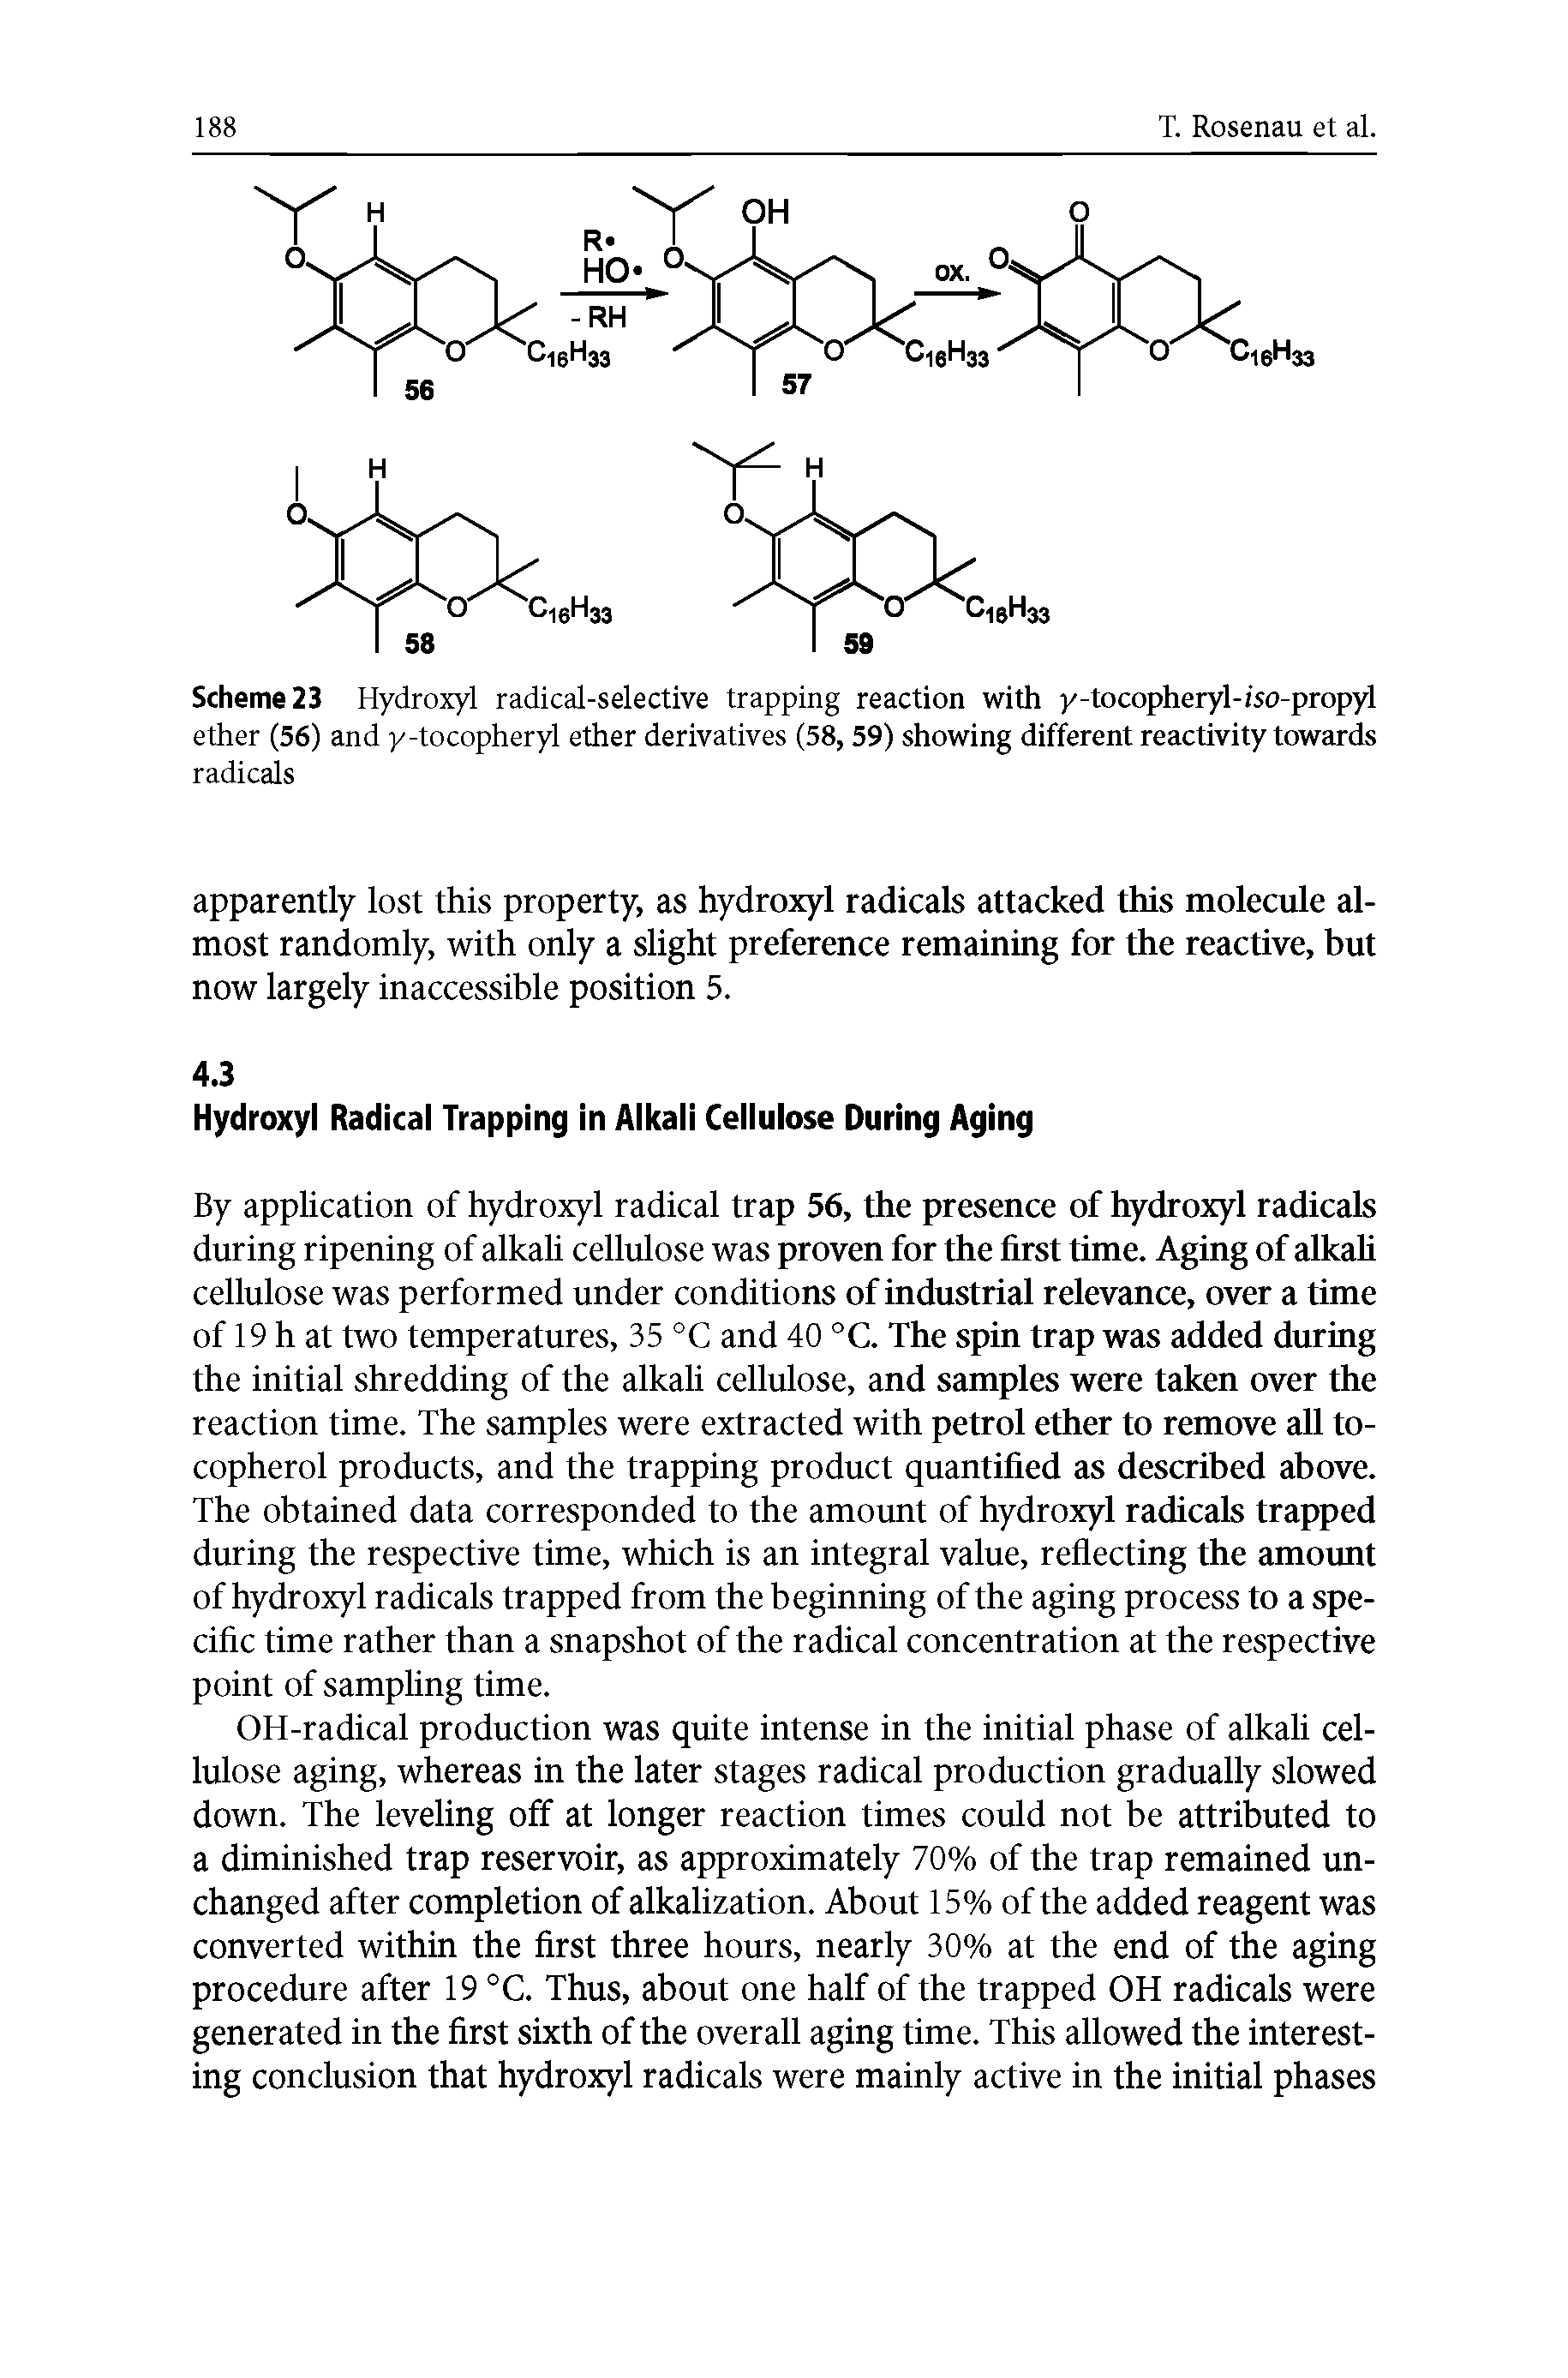 Scheme 23 Hydroxyl radical-selective trapping reaction with y - locopheryl - iso-propyl ether (56) and y-tocopheryl ether derivatives (58, 59) showing different reactivity towards radicals...